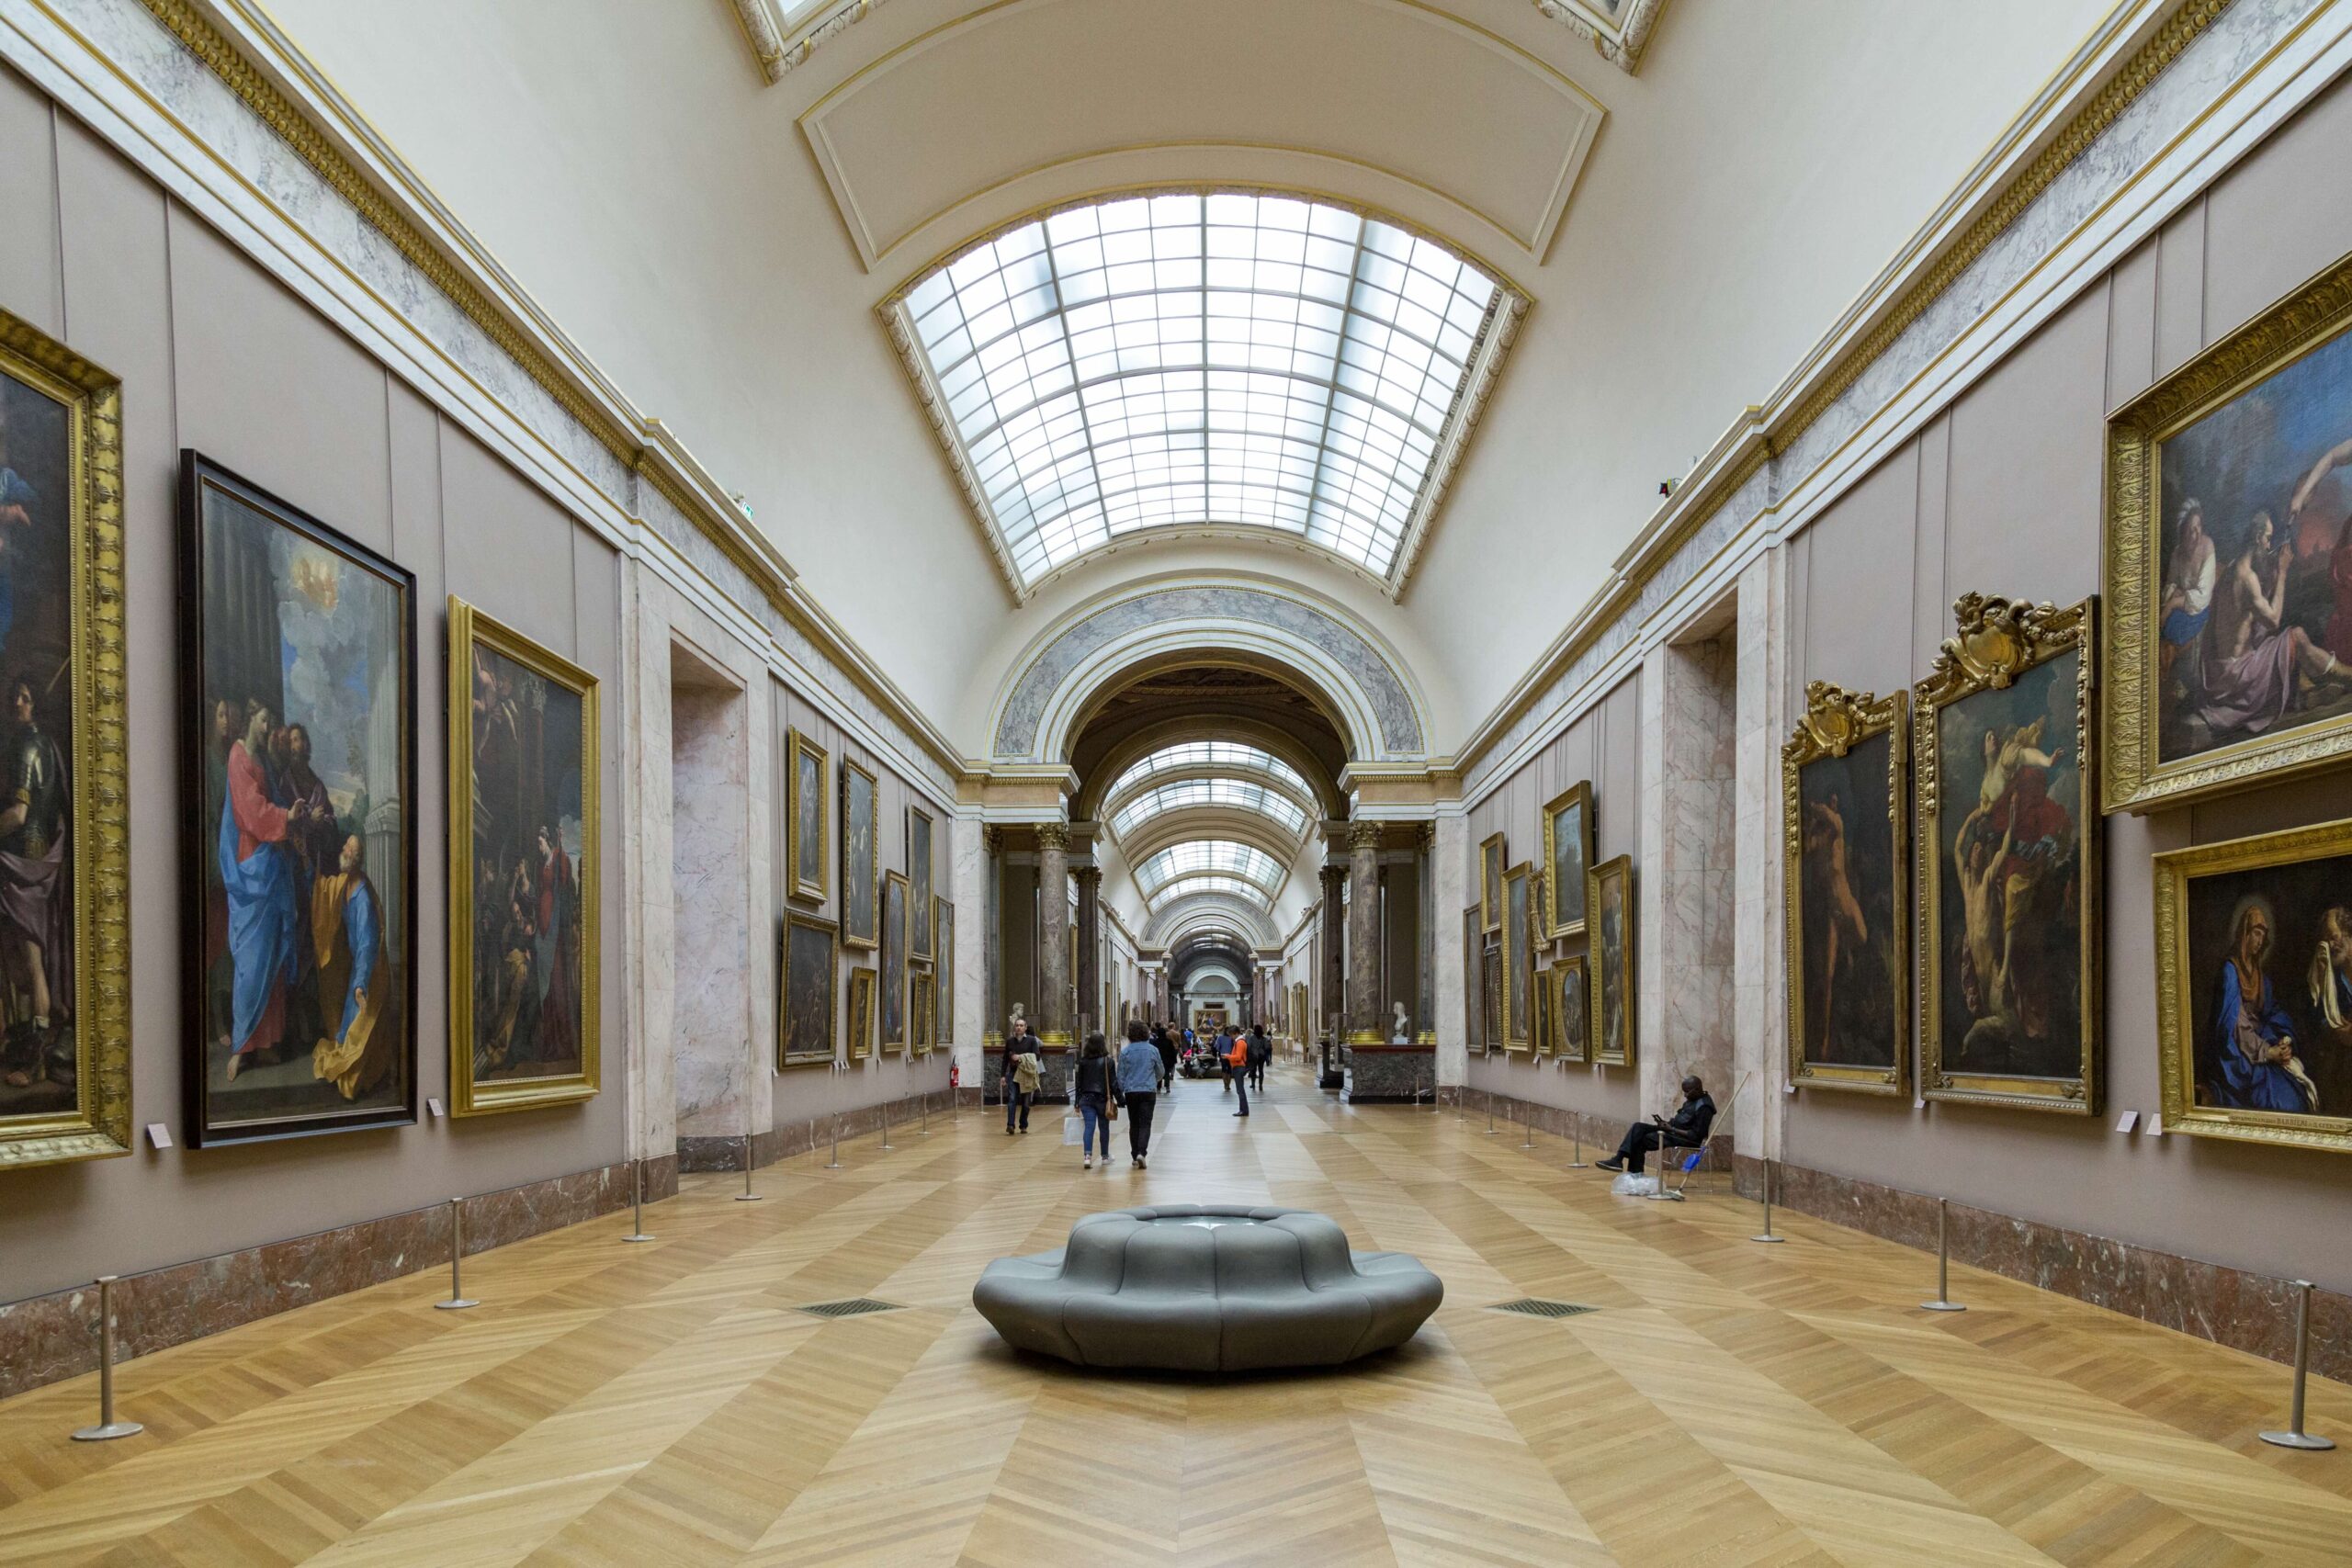 There are numerous ways to save on a Louvre Museum ticket (photo by OliverFoerstner, Adobe Stock)